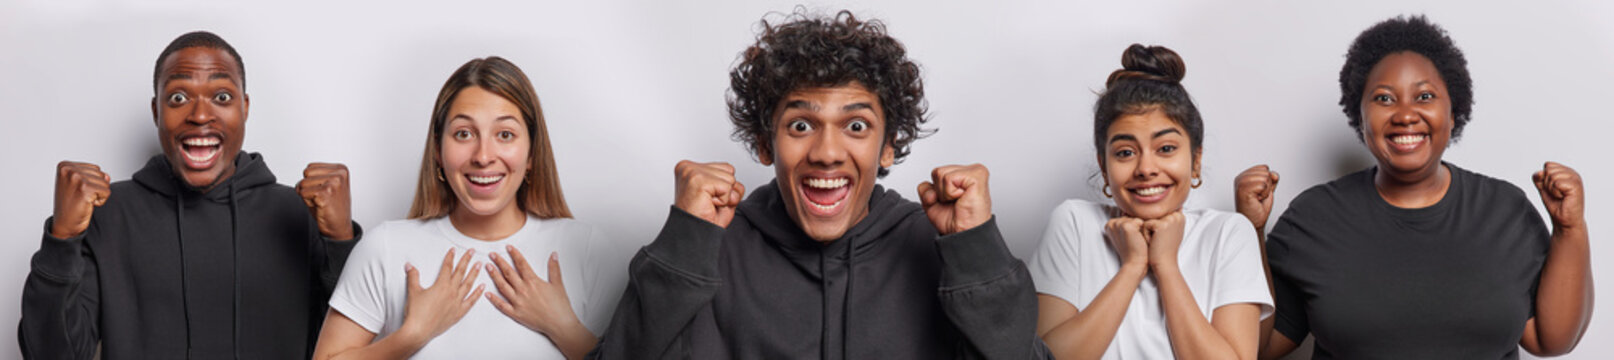 Horizontal shot of amazed cheerful Hindu man with curly hair and dark skinned guy clench fists celebrate success smile gladfully and react to something incredible isolated over white background